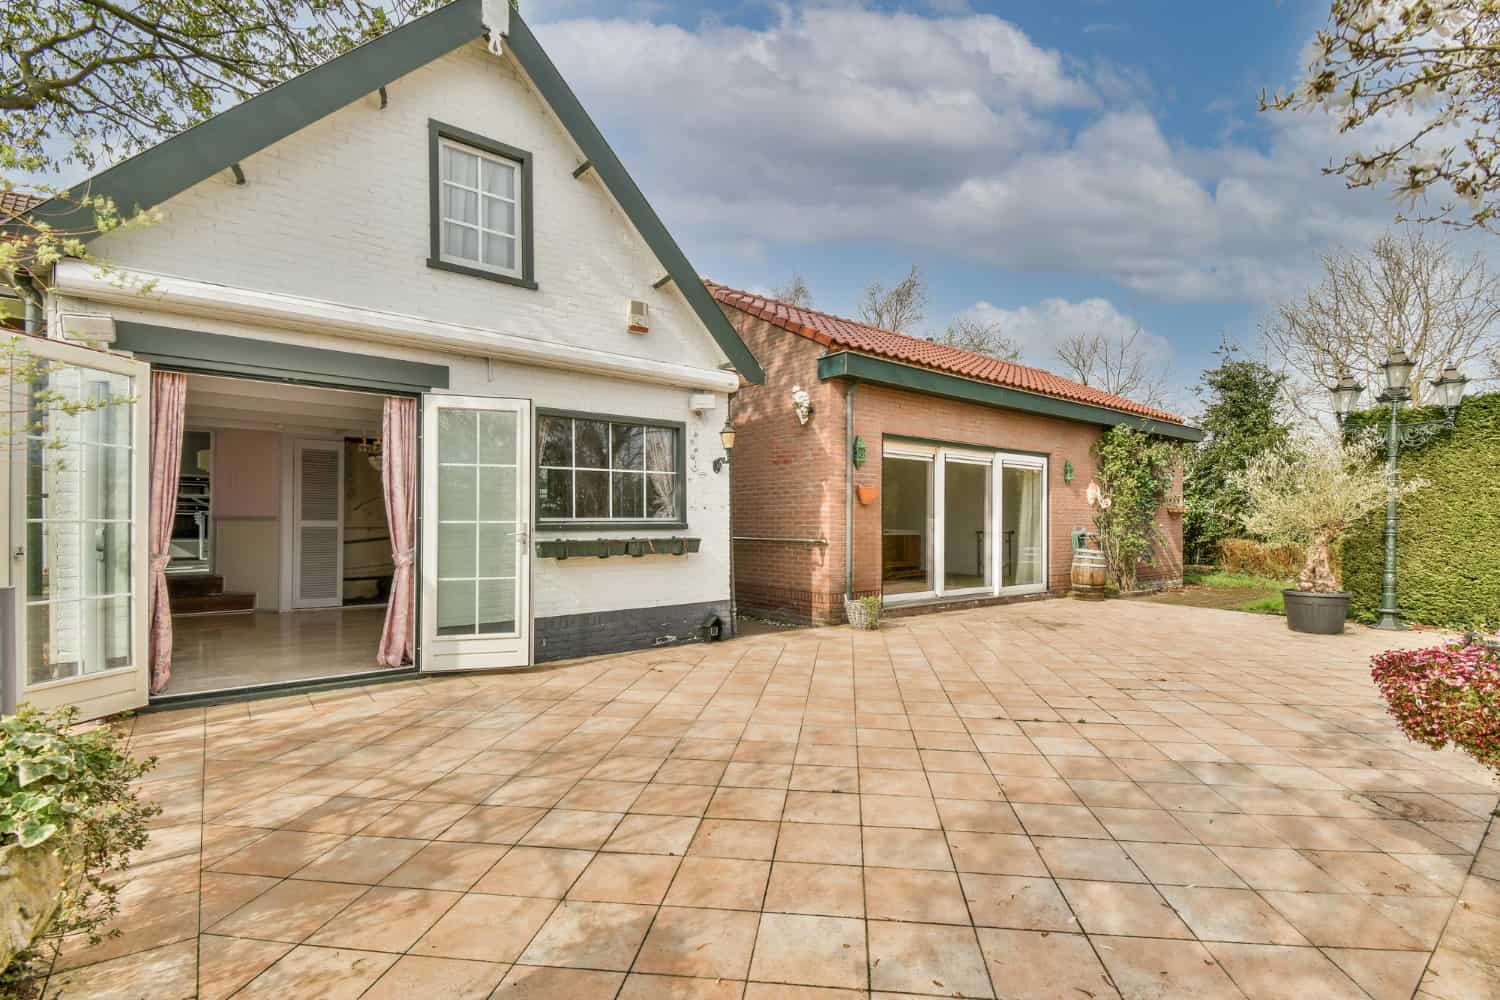 Image shows the exterior of a home with a large patio space